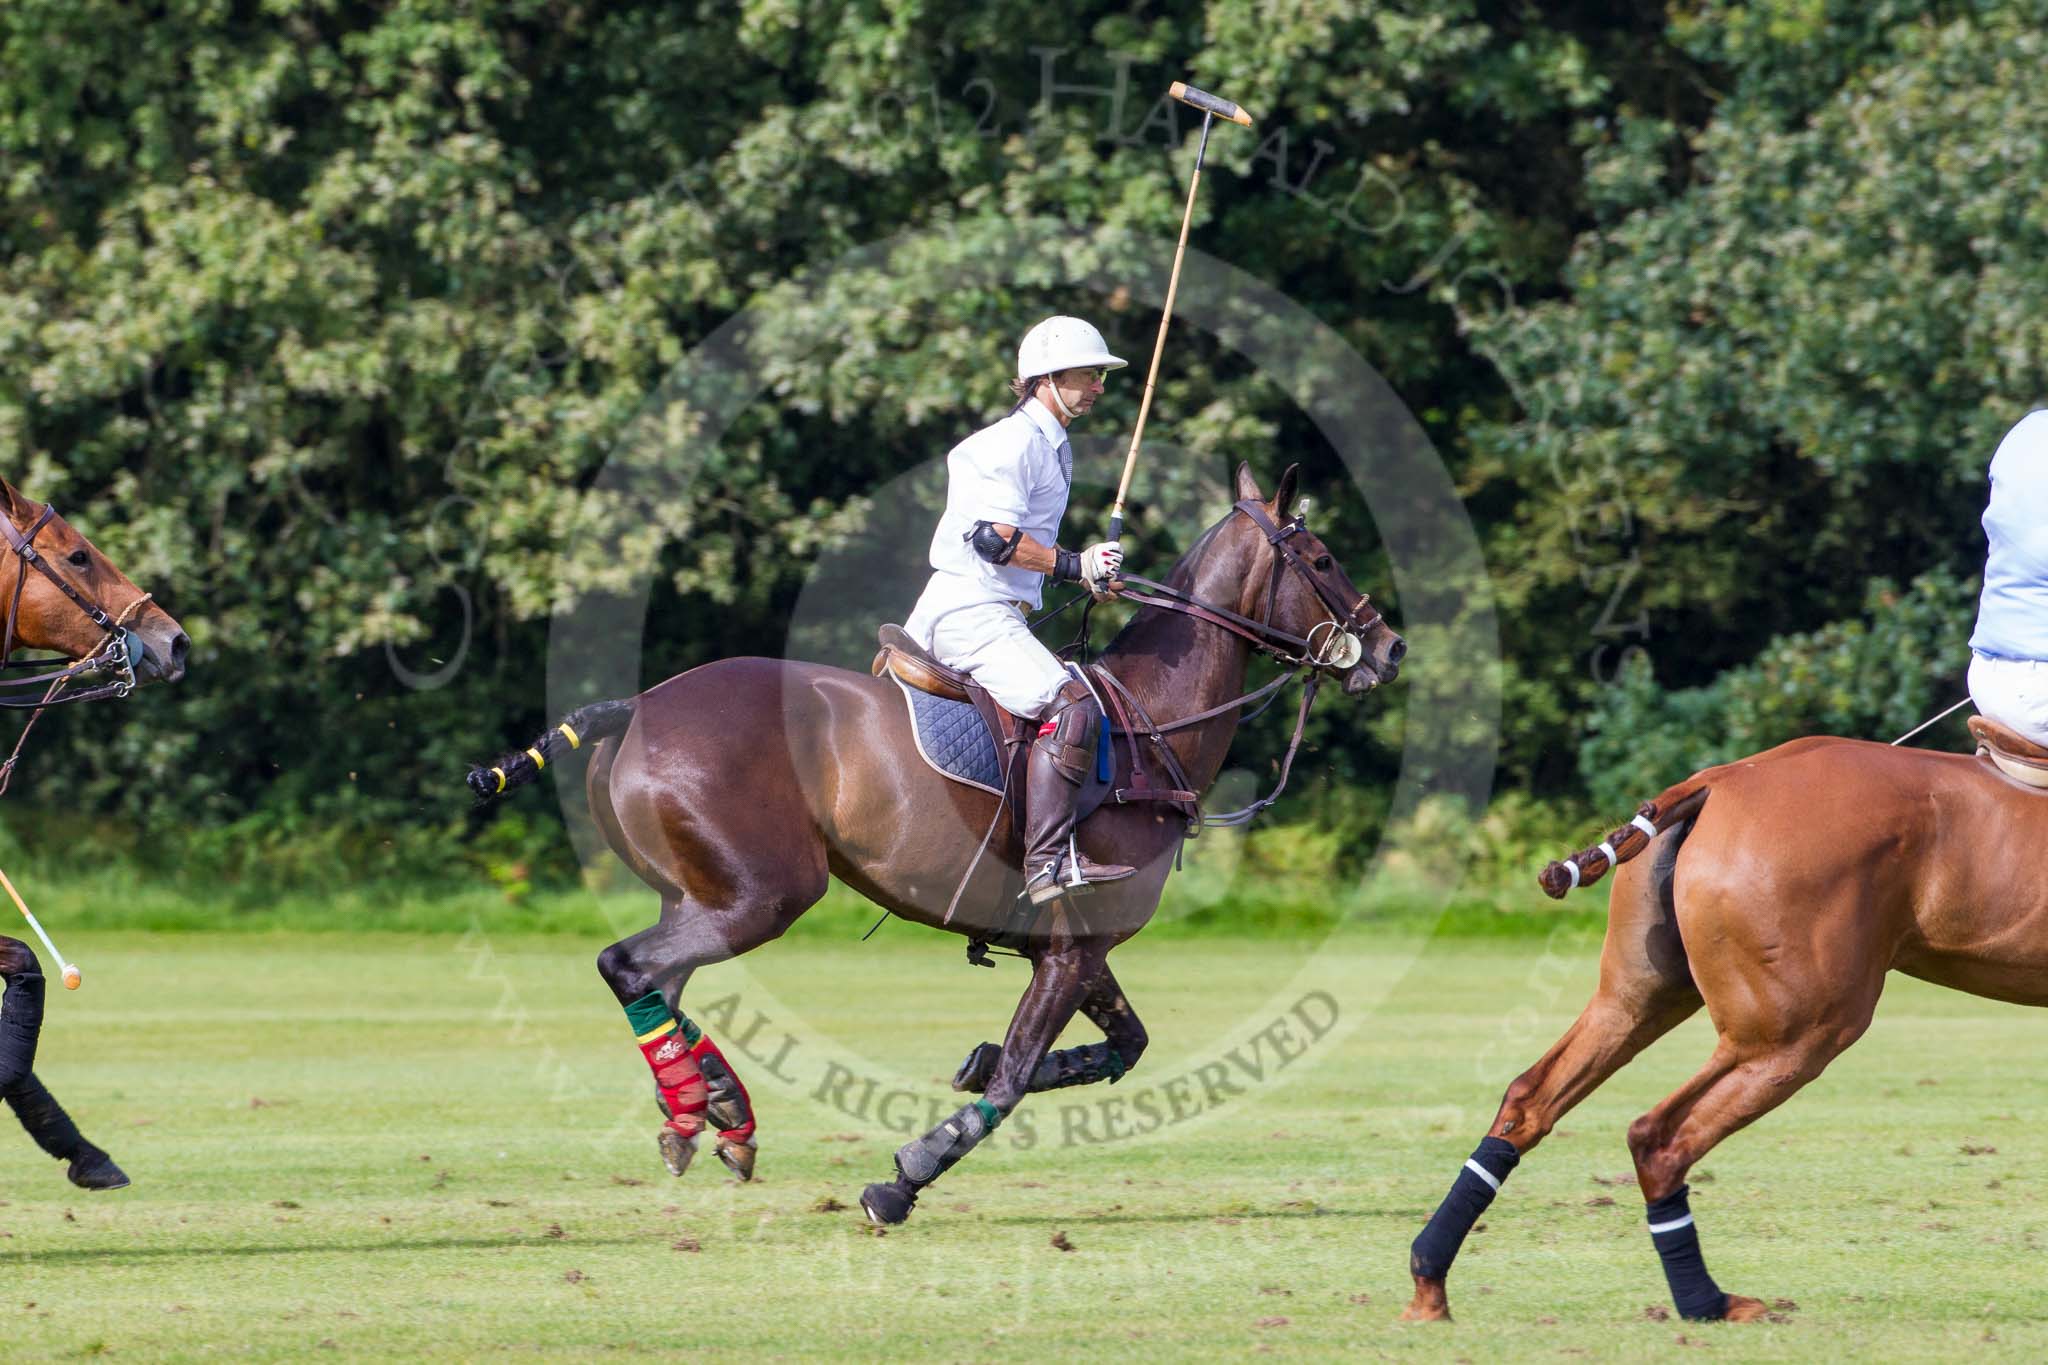 7th Heritage Polo Cup semi-finals: La Golondrina Argentina Pepe Riglos (6)..
Hurtwood Park Polo Club,
Ewhurst Green,
Surrey,
United Kingdom,
on 04 August 2012 at 16:49, image #331